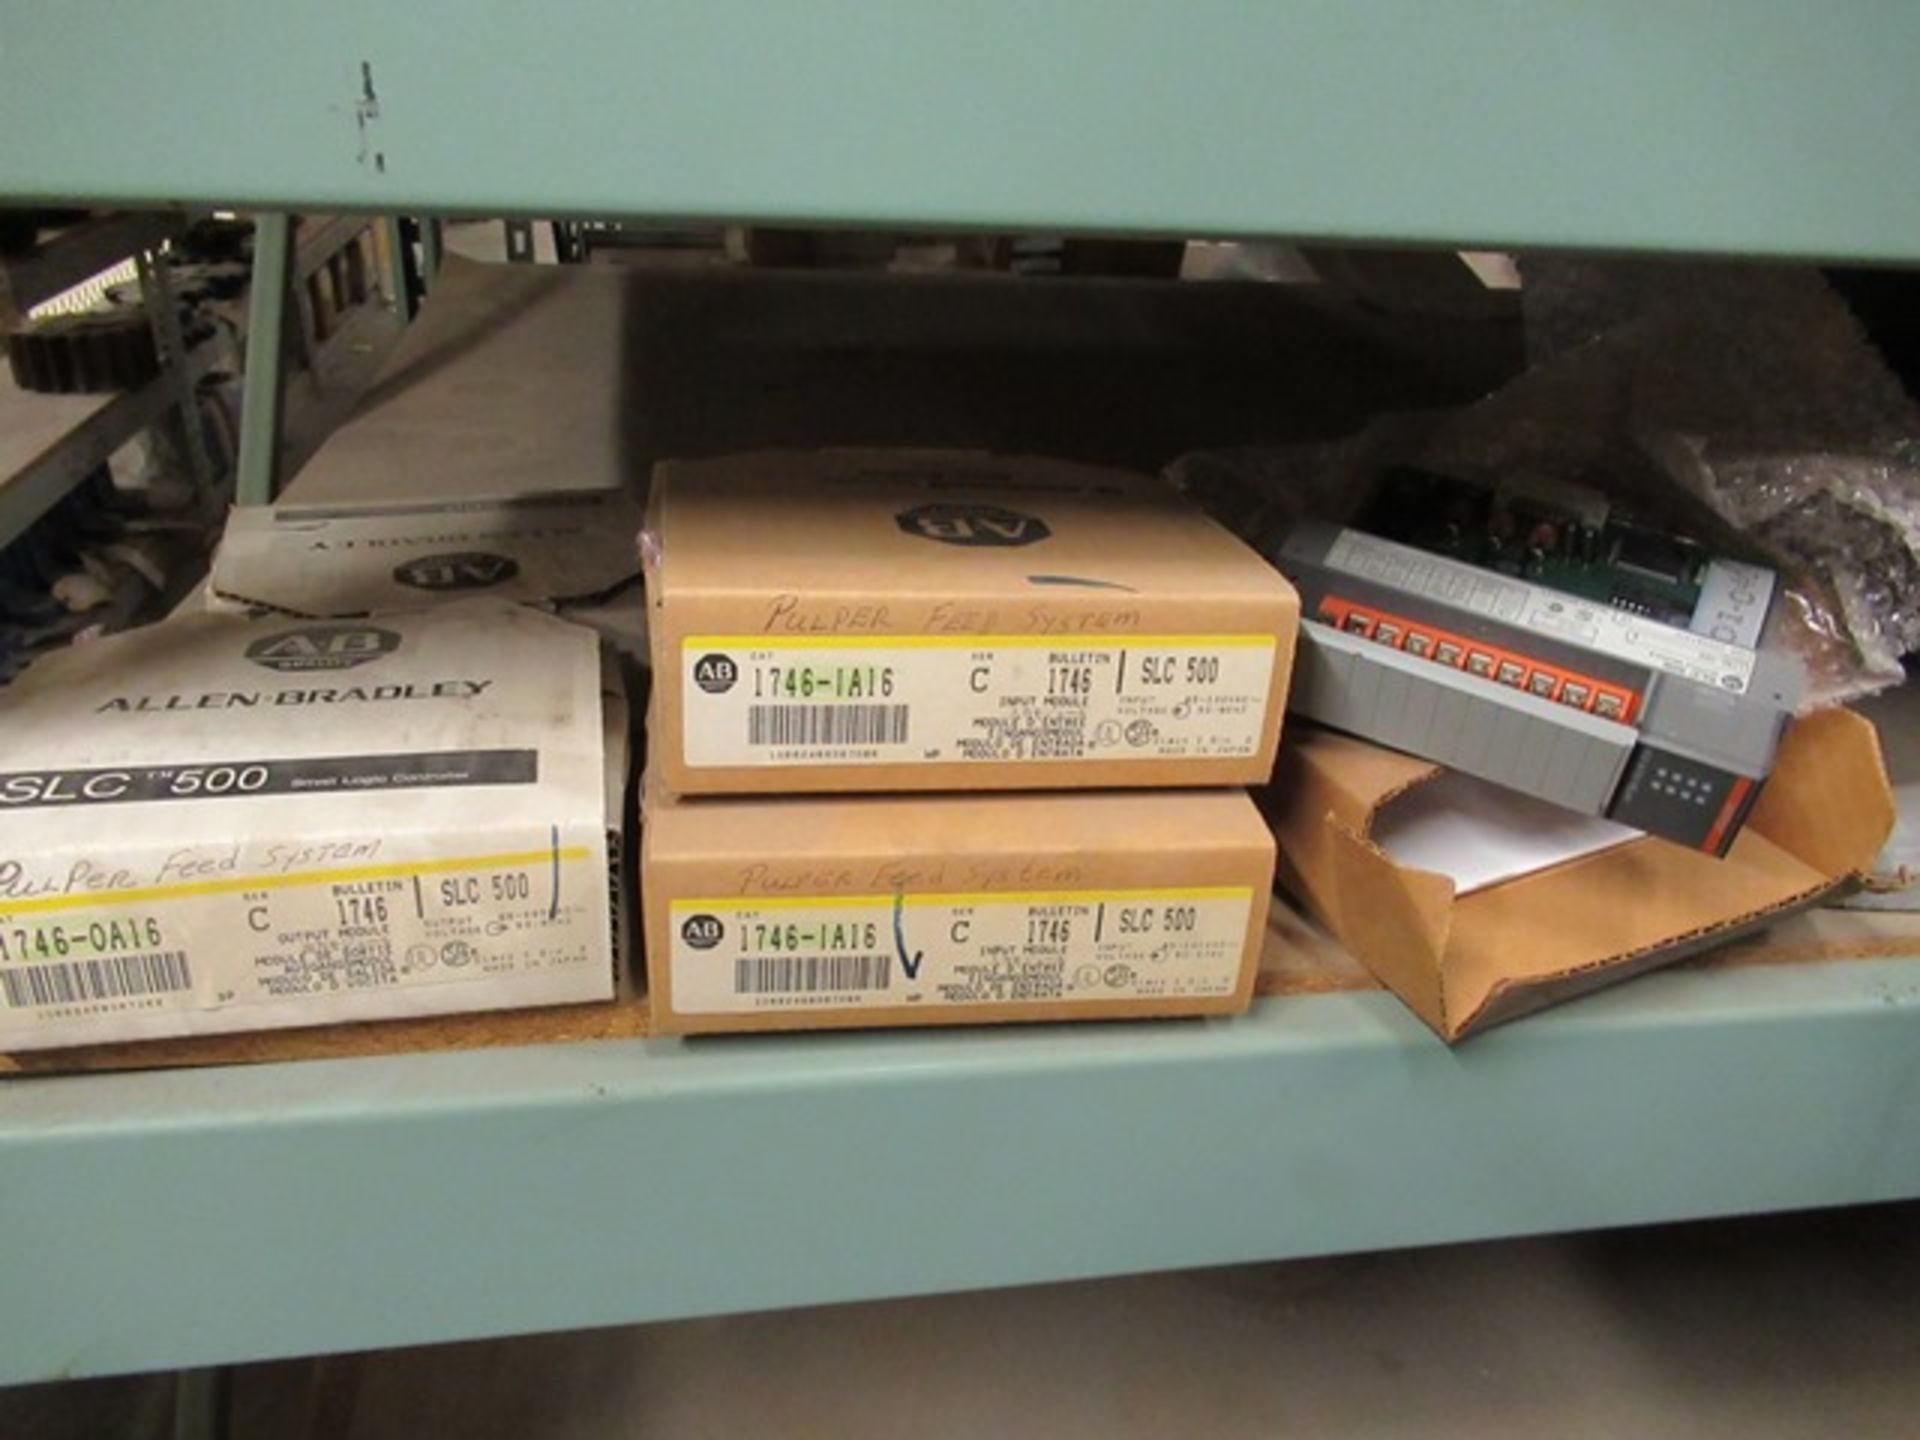 LOT ASST. ALLEN-BRADLEY PARTS, BOARD, DRIVES, CONTROLS, ETC. 1 -SECTION OF RACKING (M-S) - Image 13 of 17